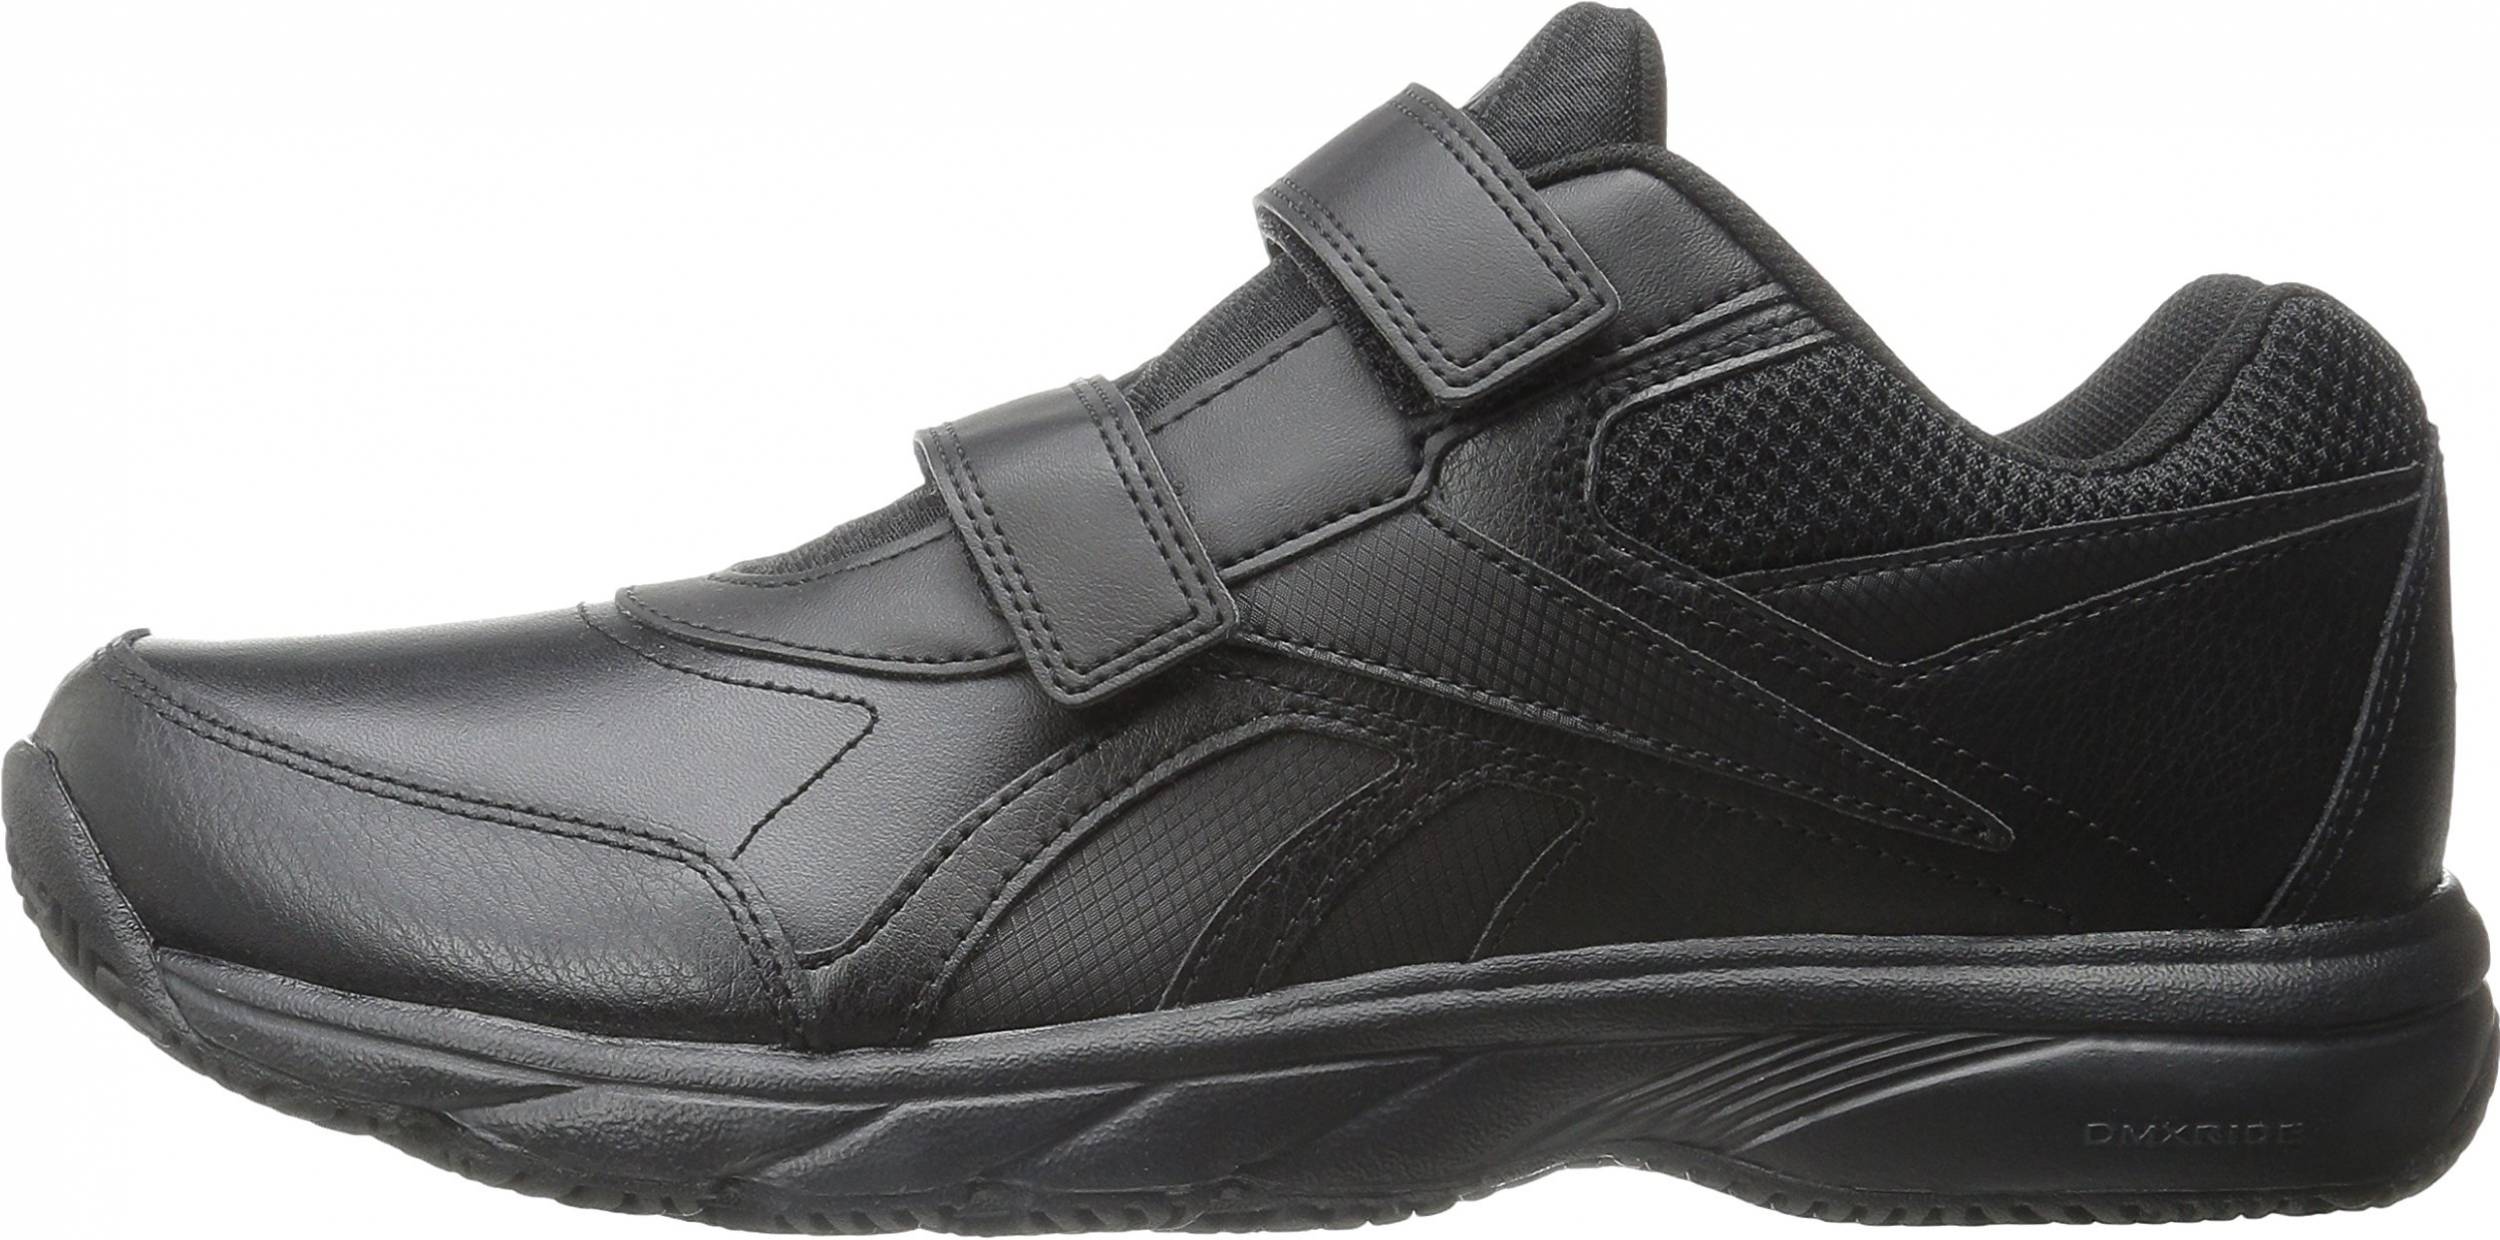 black walking shoes for work